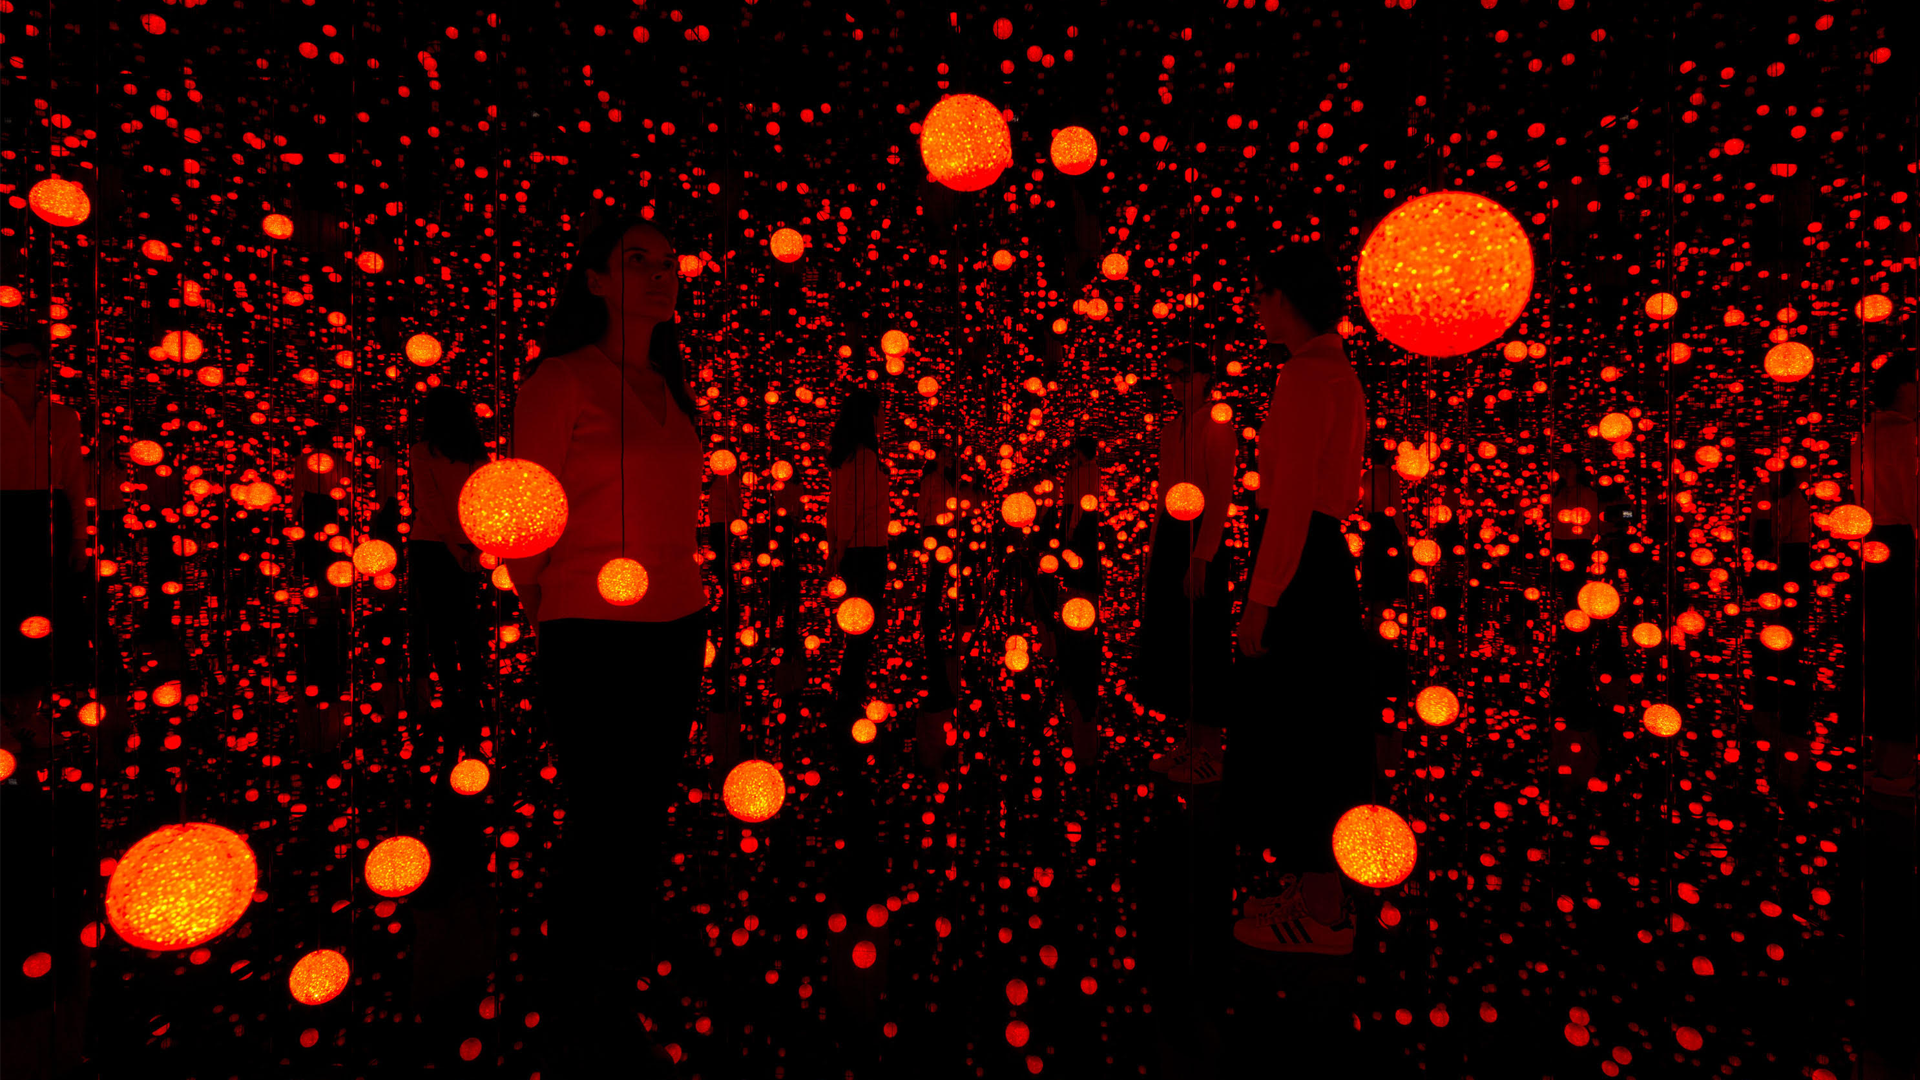 Yayoi Kusama, INFINITY MIRRORED ROOM - DANCING LIGHTS THAT FLEW UP TO THE UNIVERSE, 2019. Mirrored glass, wood, LED lighting system, metal, and acrylic panel. Courtesy of David Zwirner